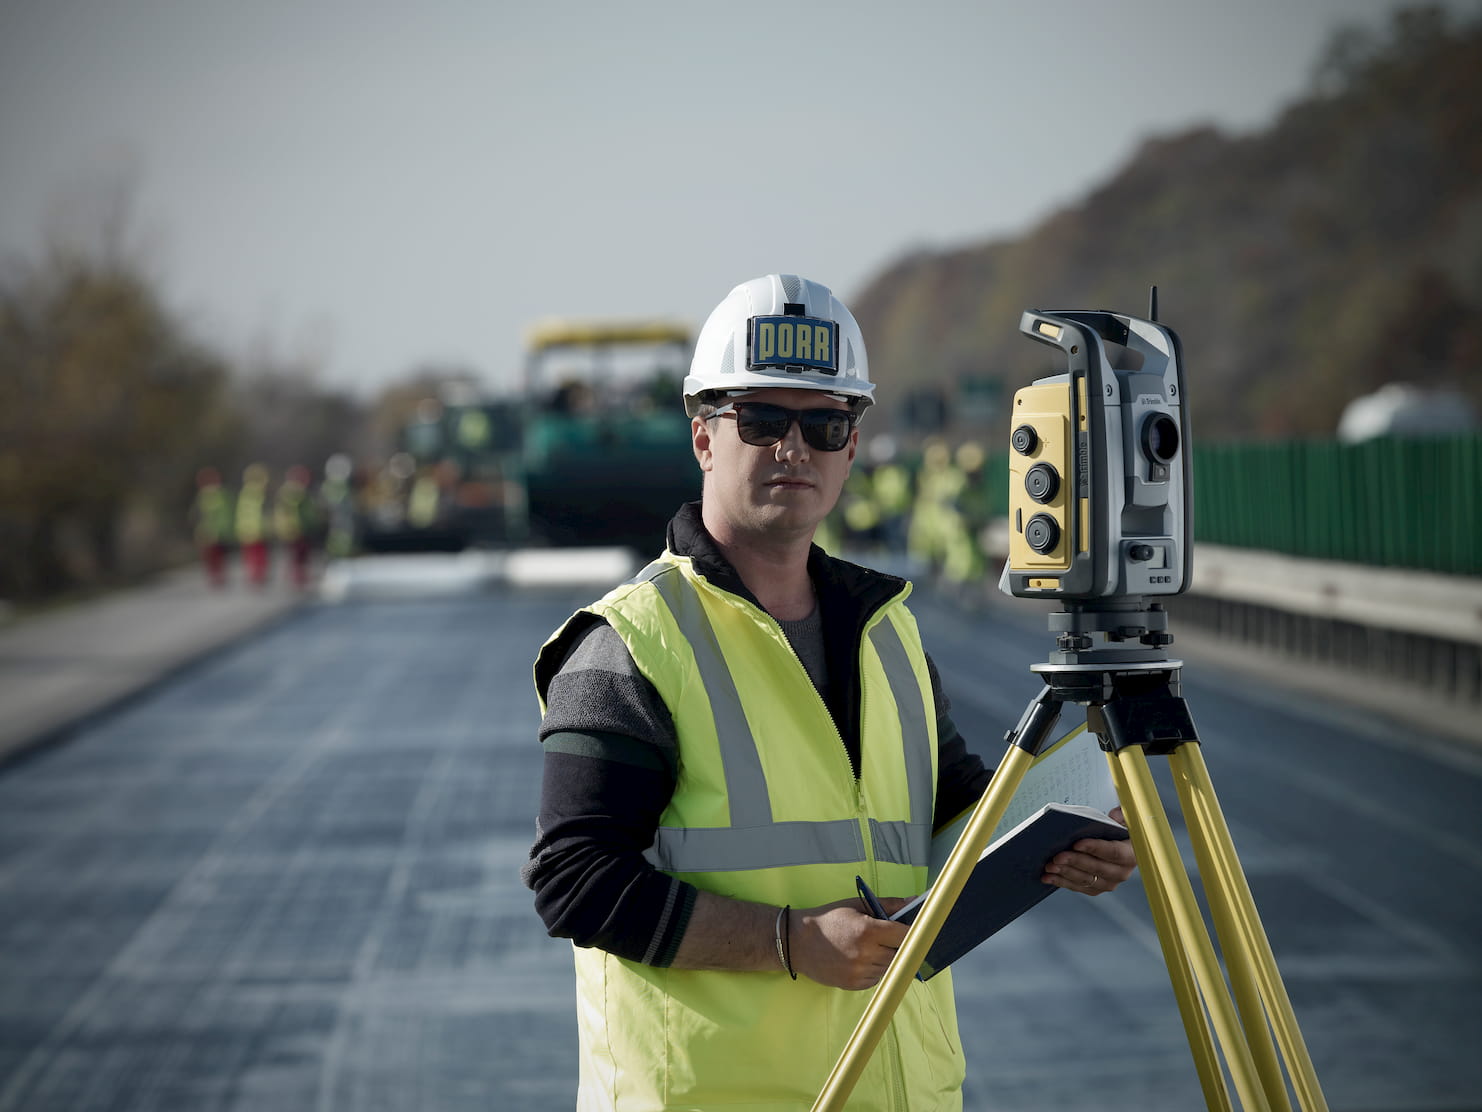 Photo: worker wearing safety vest, PORR helmet and sunglasses, holding a book for taking notes, next to an optical leveling instrument; blurred construction site with freshly cemented road in the background